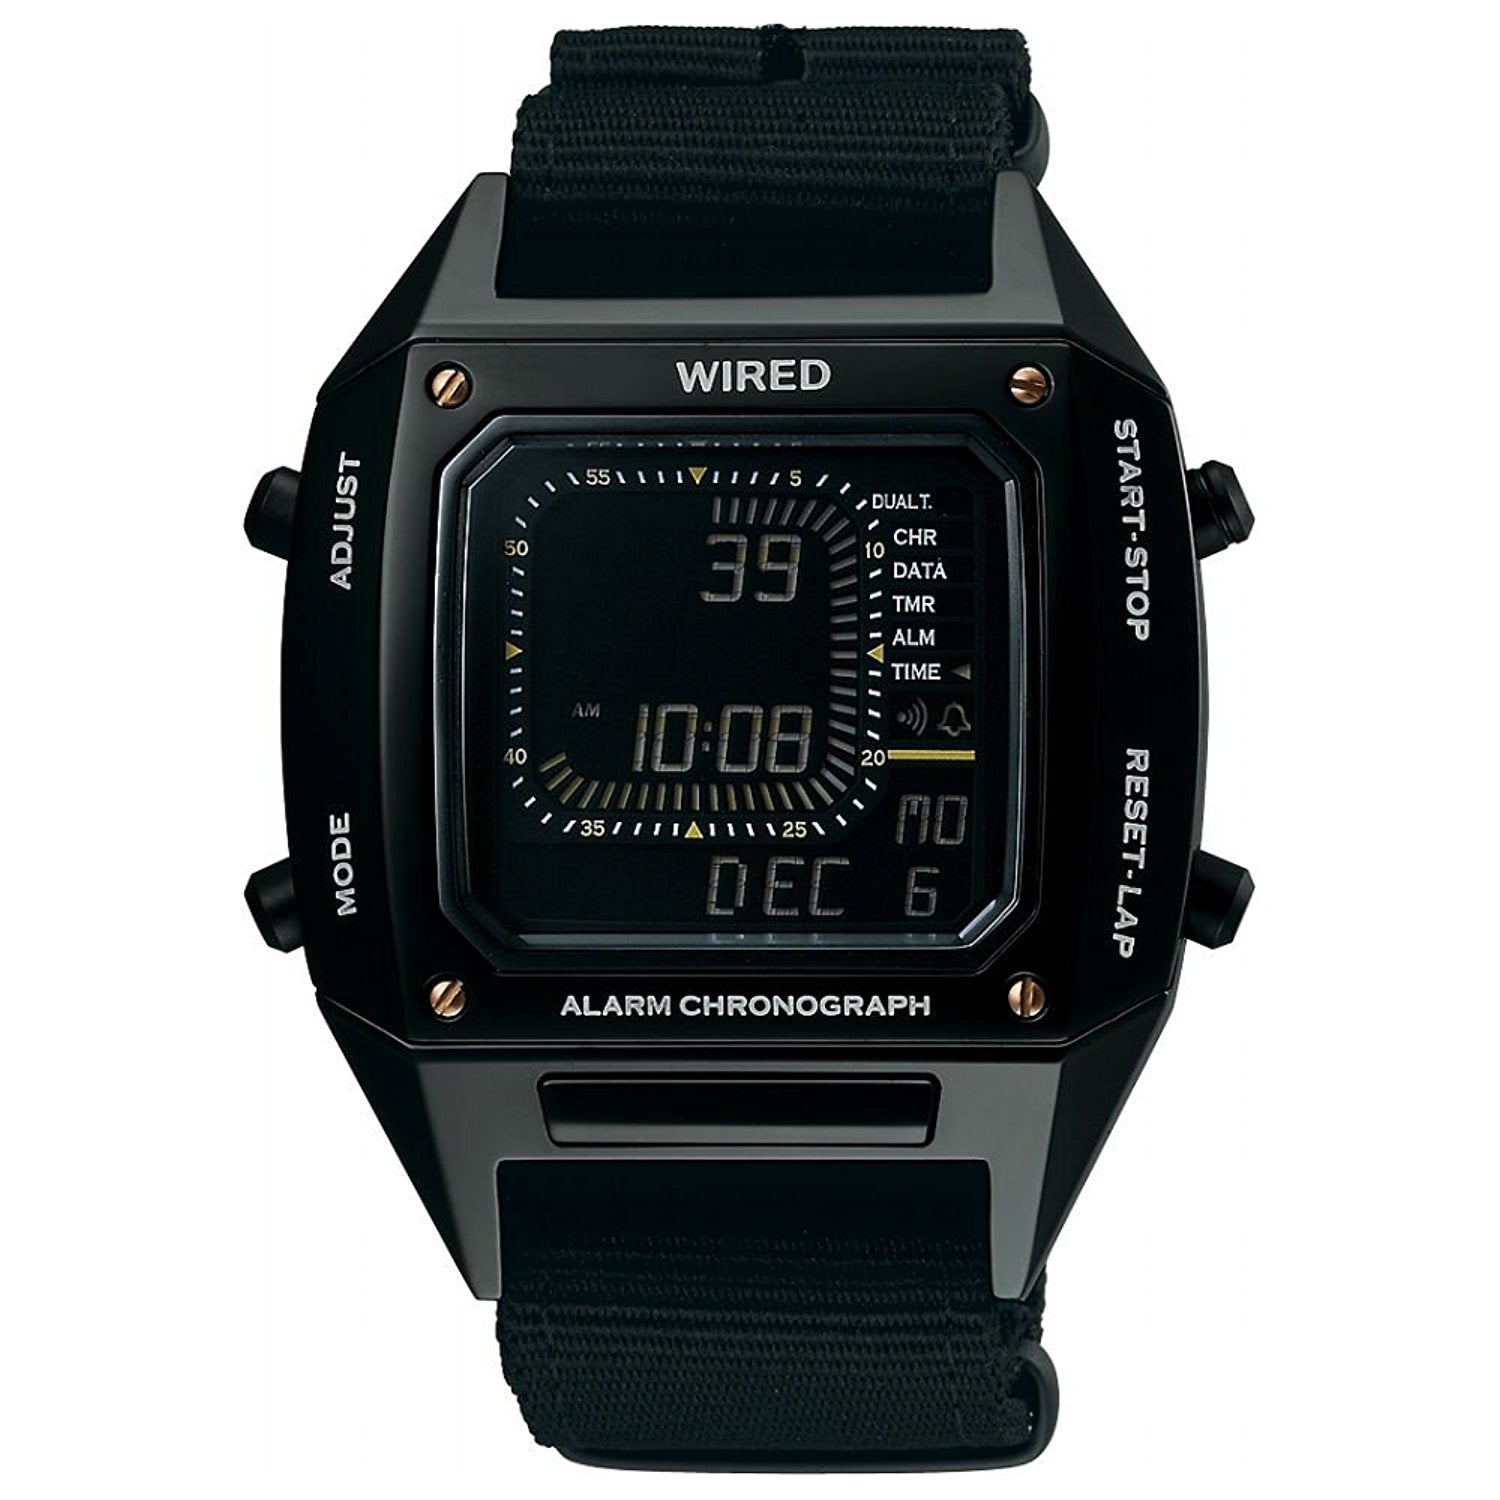 Anyone seen these watches yet? | WatchUSeek Watch Forums